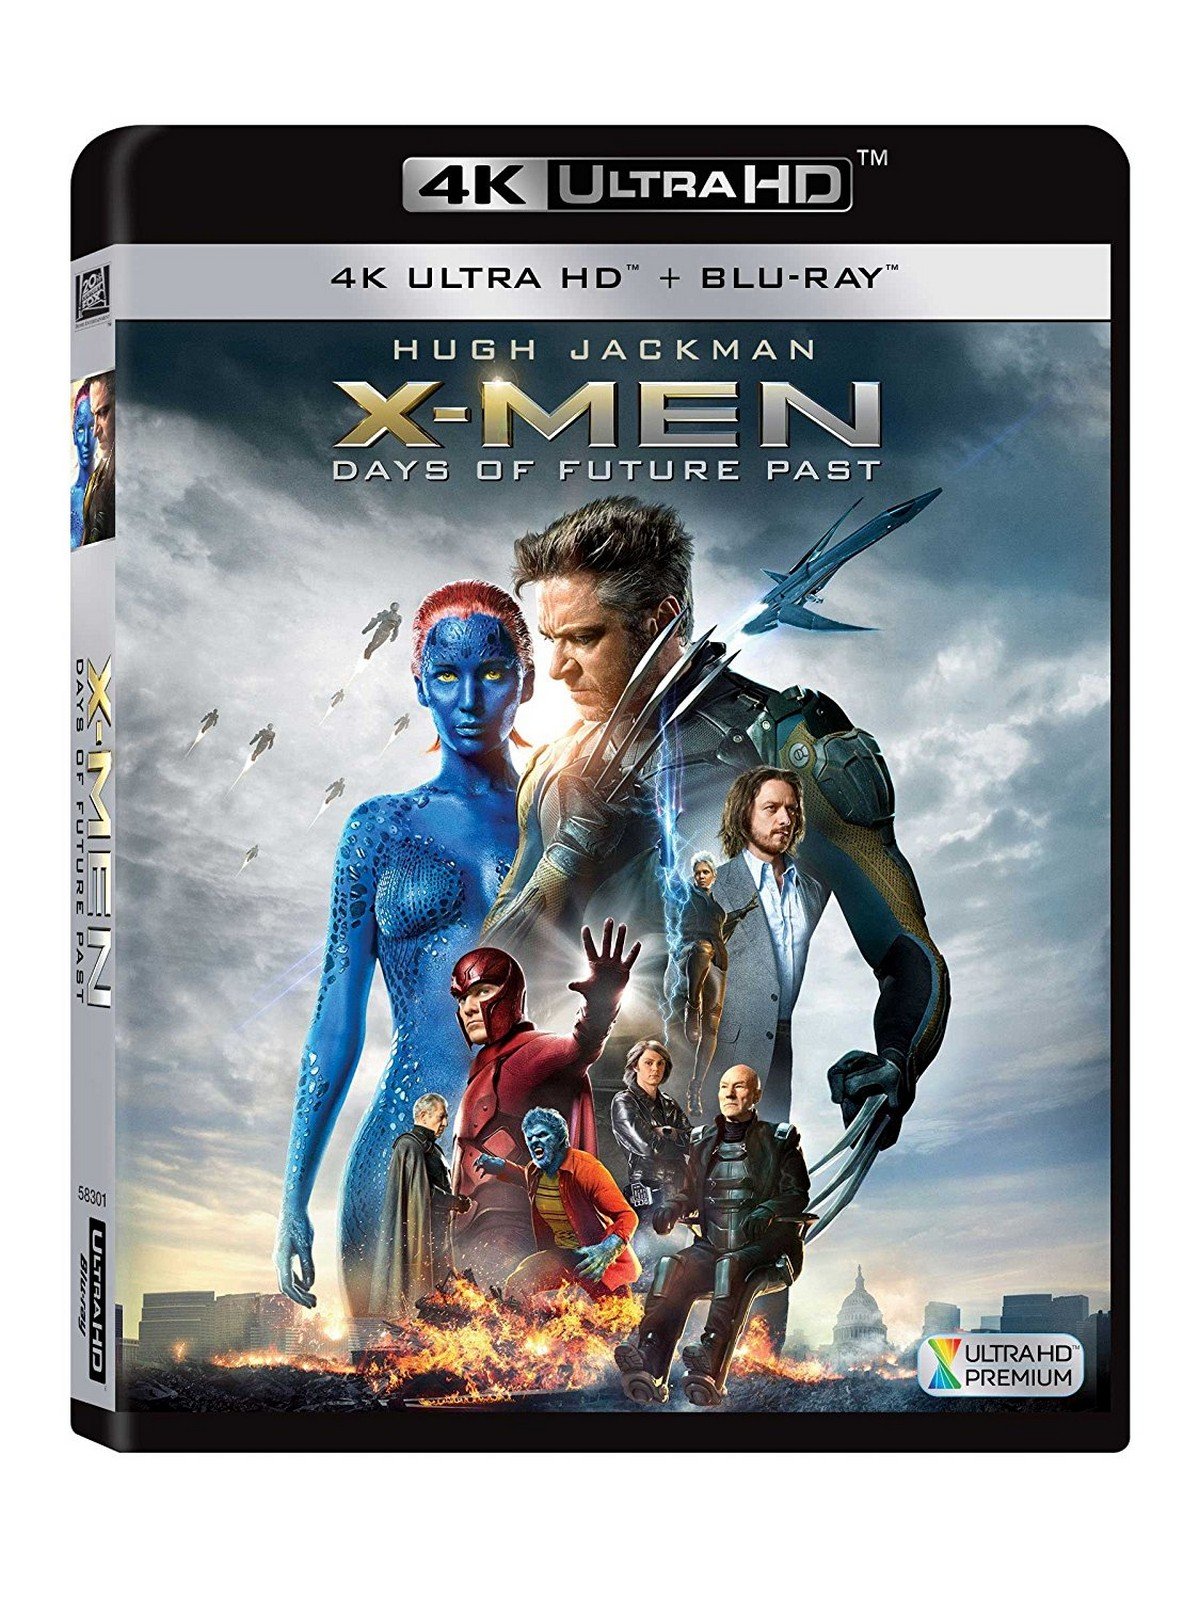 x-men-days-of-future-past-4k-uhd-hd-2-disc-movie-purchase-or-wa